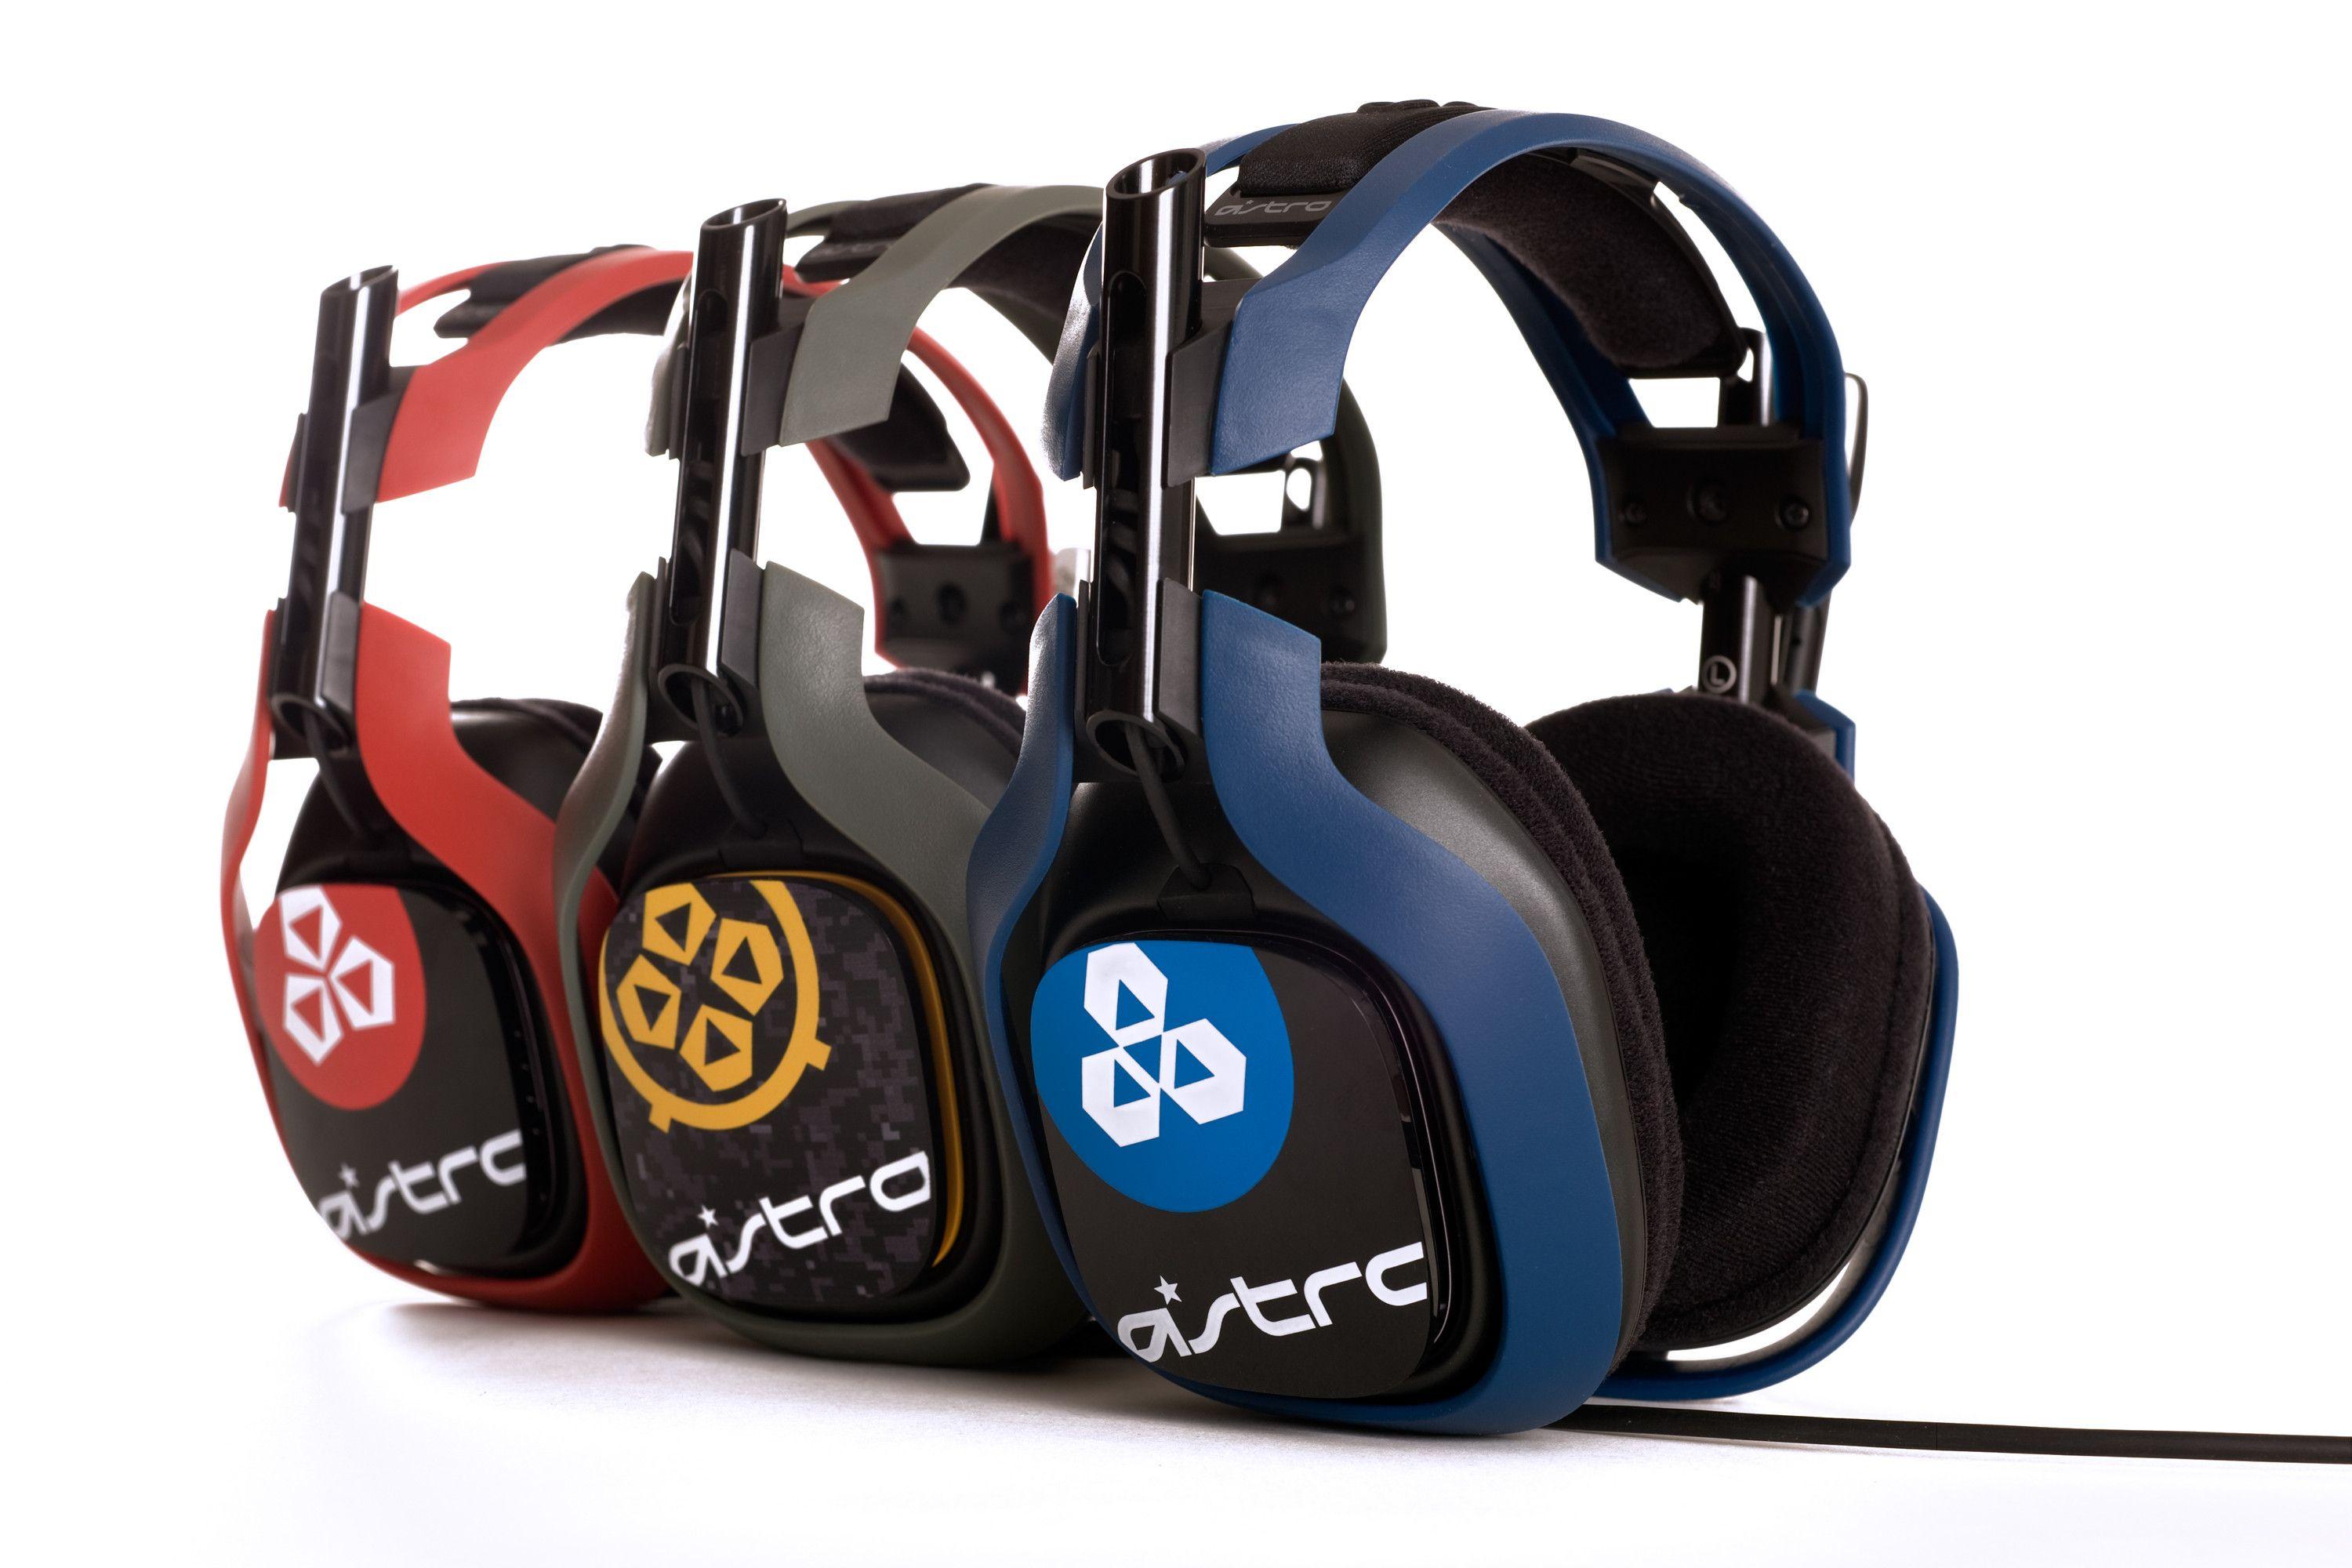 UPDATE Astro Gaming audio package giveaway